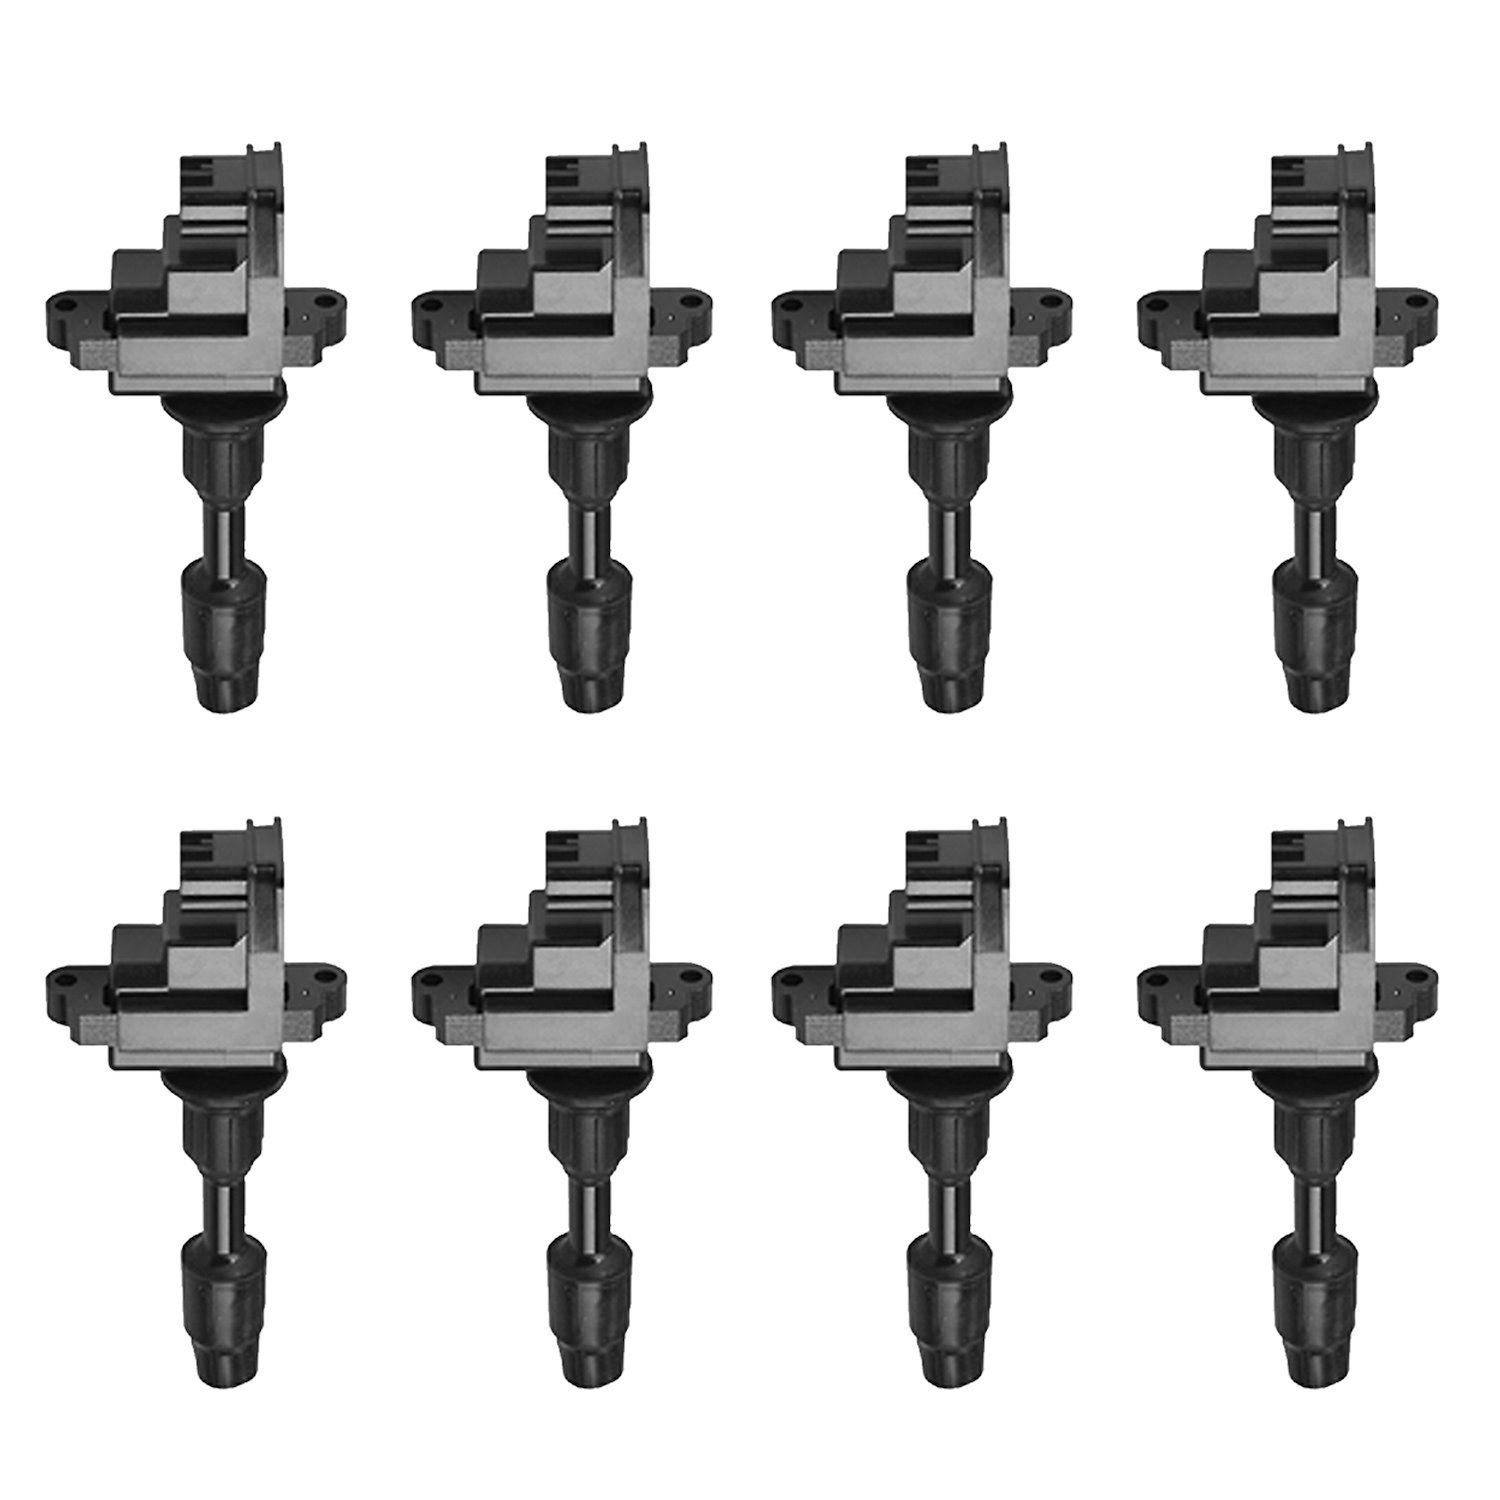 OE Replacement Ignition Coils for 1997-2001 Infiniti Q45 4.1L V8